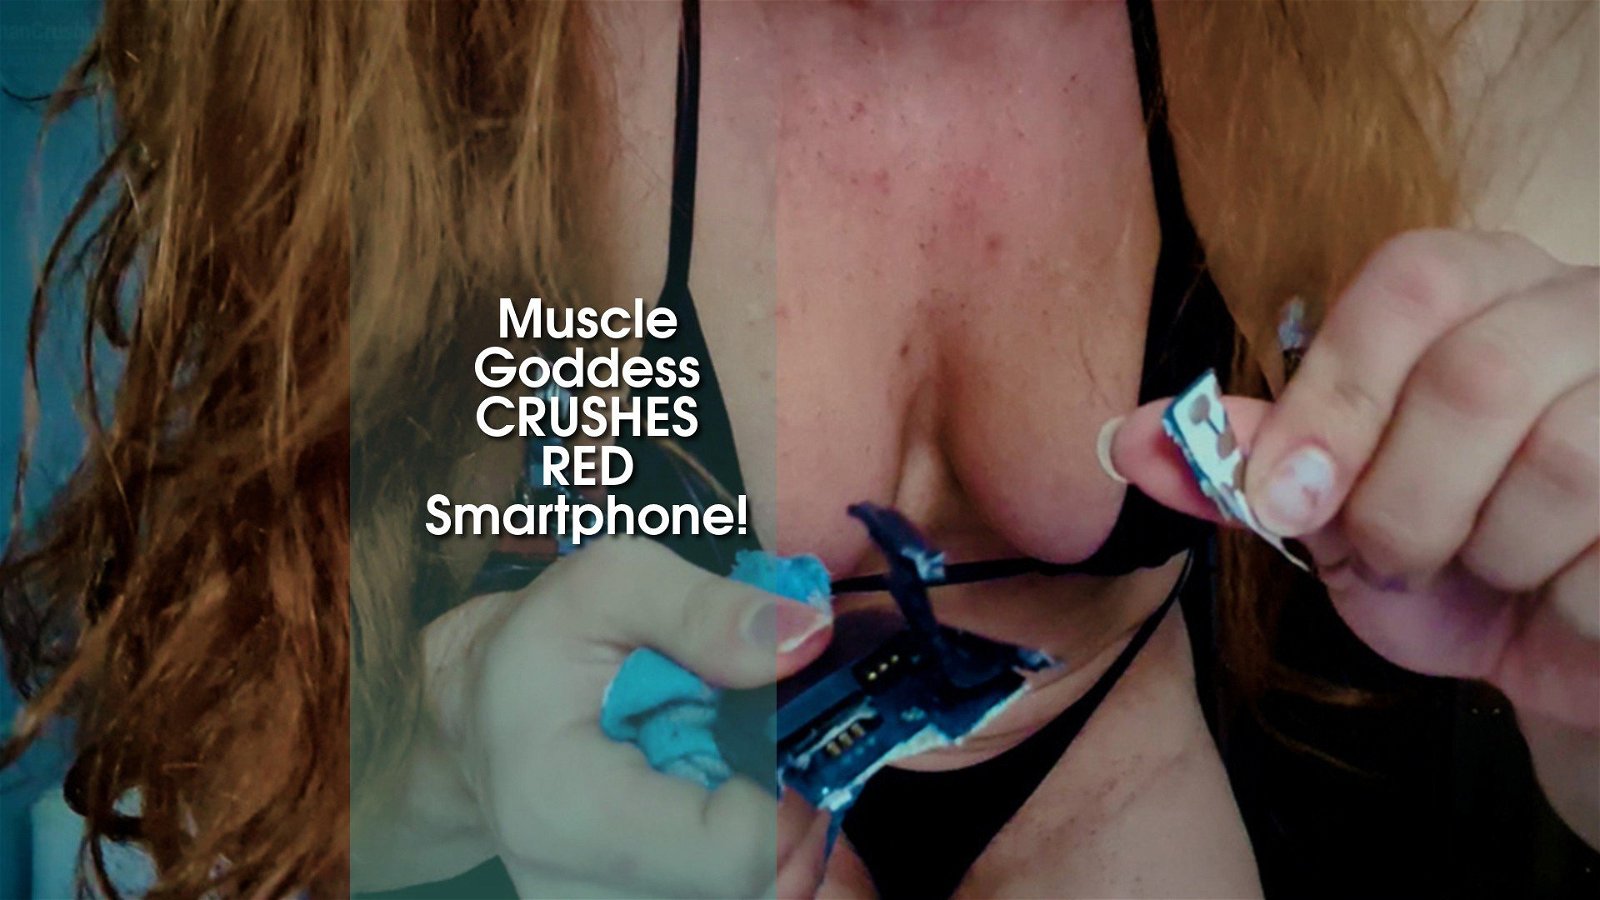 Watch the Photo by MusclegirlStrength with the username @MusclegirlStrength, who is a brand user, posted on January 8, 2024 and the text says 'Muscle Goddess CRUSHES RED Smartphone! 💪💥
Link: https://bit.ly/3MsT2jn


#MuscularMondays #FlexFriday #StrongWomen #MuscleGirls #PowerfulPhysiques #FeatsOfStrength #BendItLikeABodybuilder #CrushingGoalsAndThighs #SculptedStrengths #IronGoddesses..'